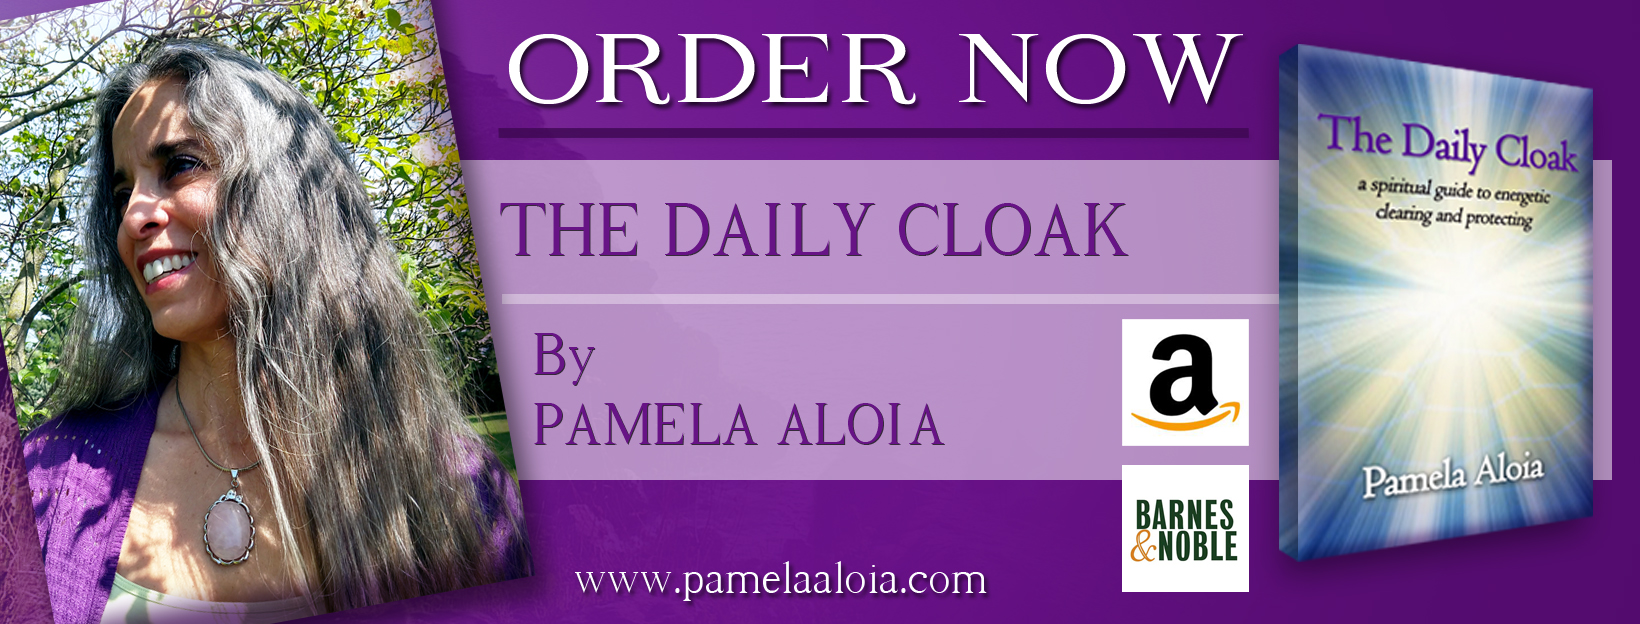 Daily Cloak Order Now Banner copy